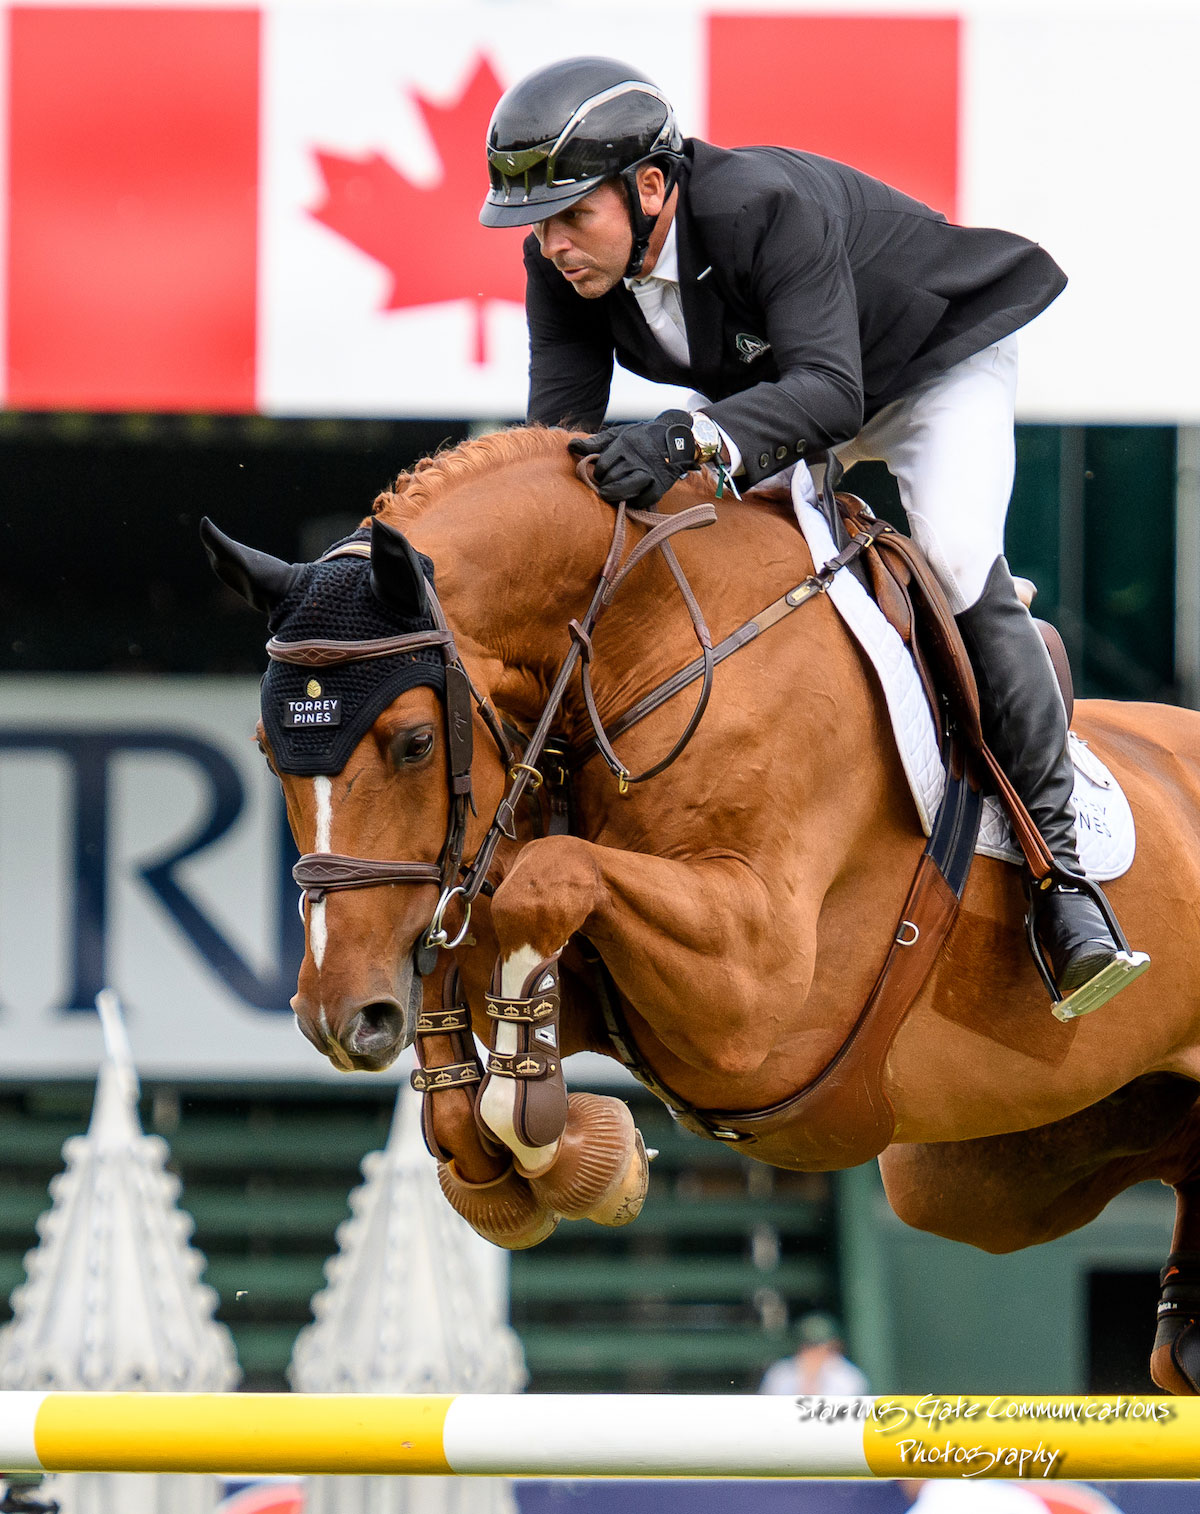 Thumbnail for Eric Lamaze Named to 7th World Championship Team